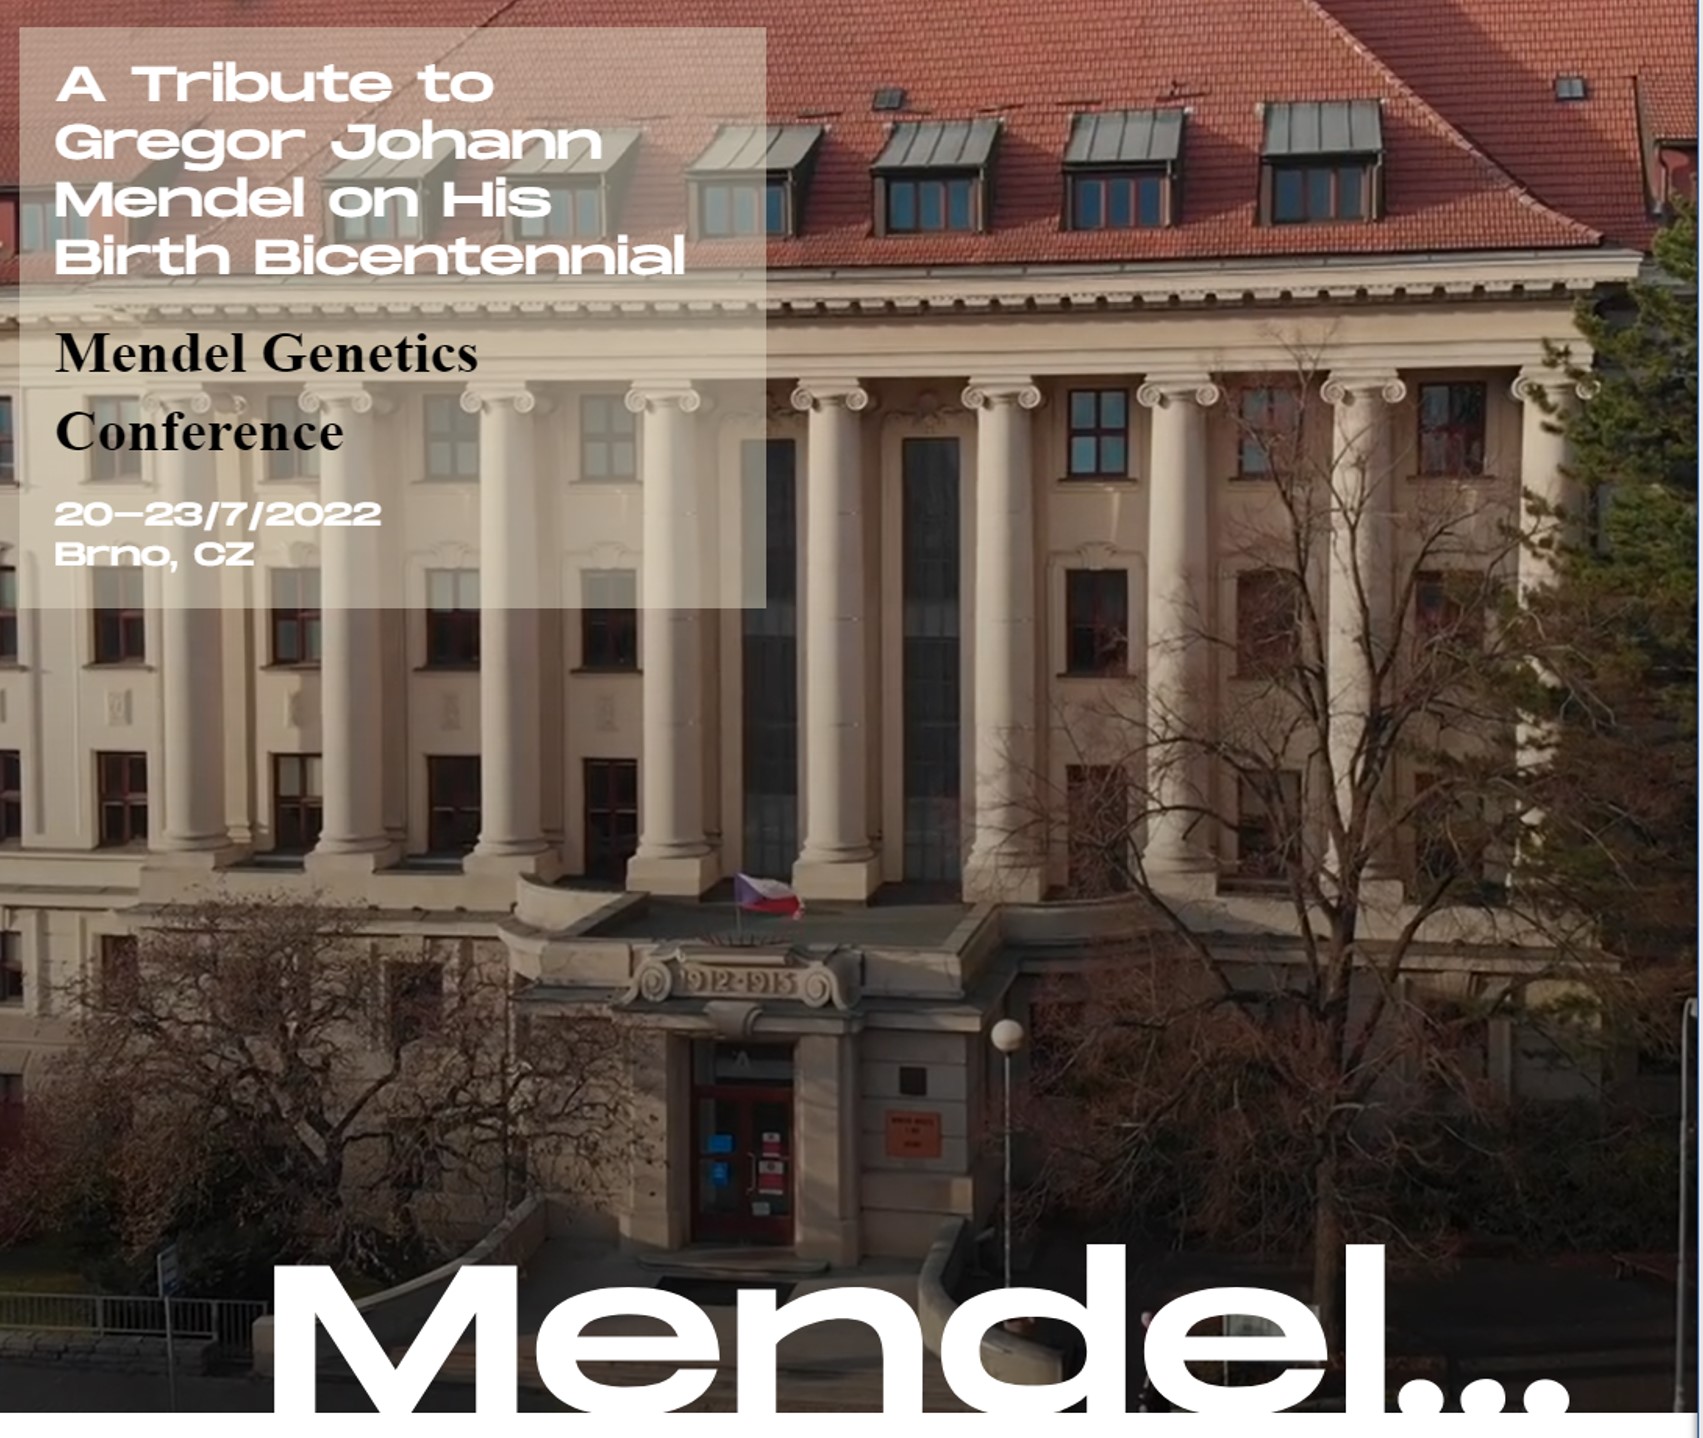 Join the Mendel Genetics Conference: A Tribute to Gregor Johann Mendel on His Birth Bicentennial